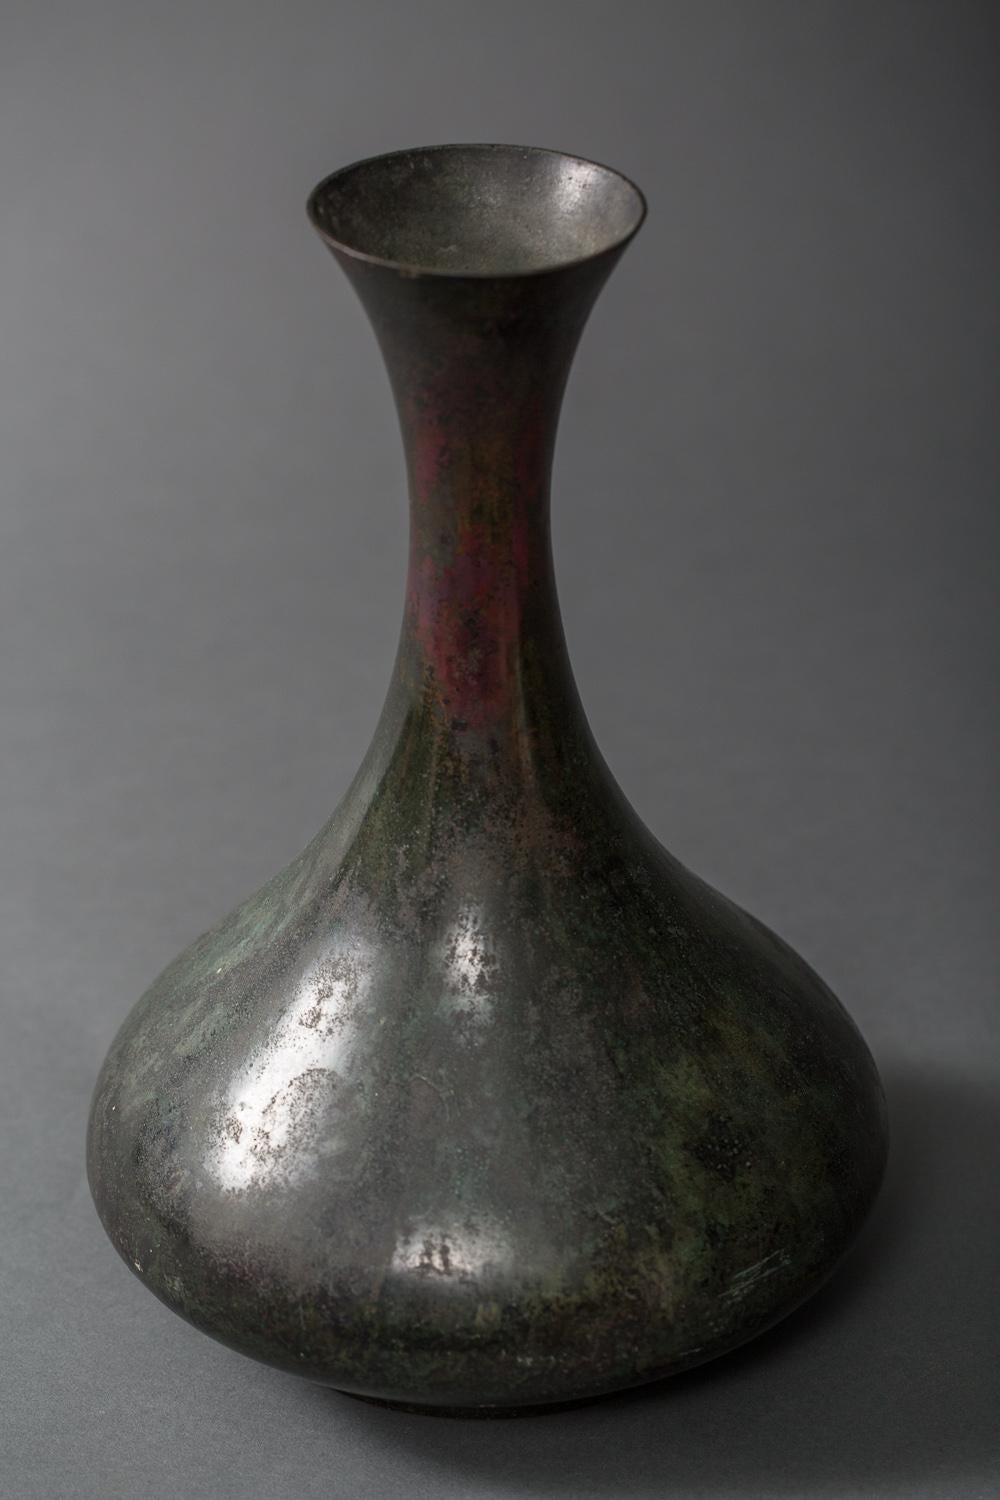 18th century Korean bronze vase. Beautiful green patina with dashes of red. Wonderful exaggerated silhouette. Collector's signature on the bottom.